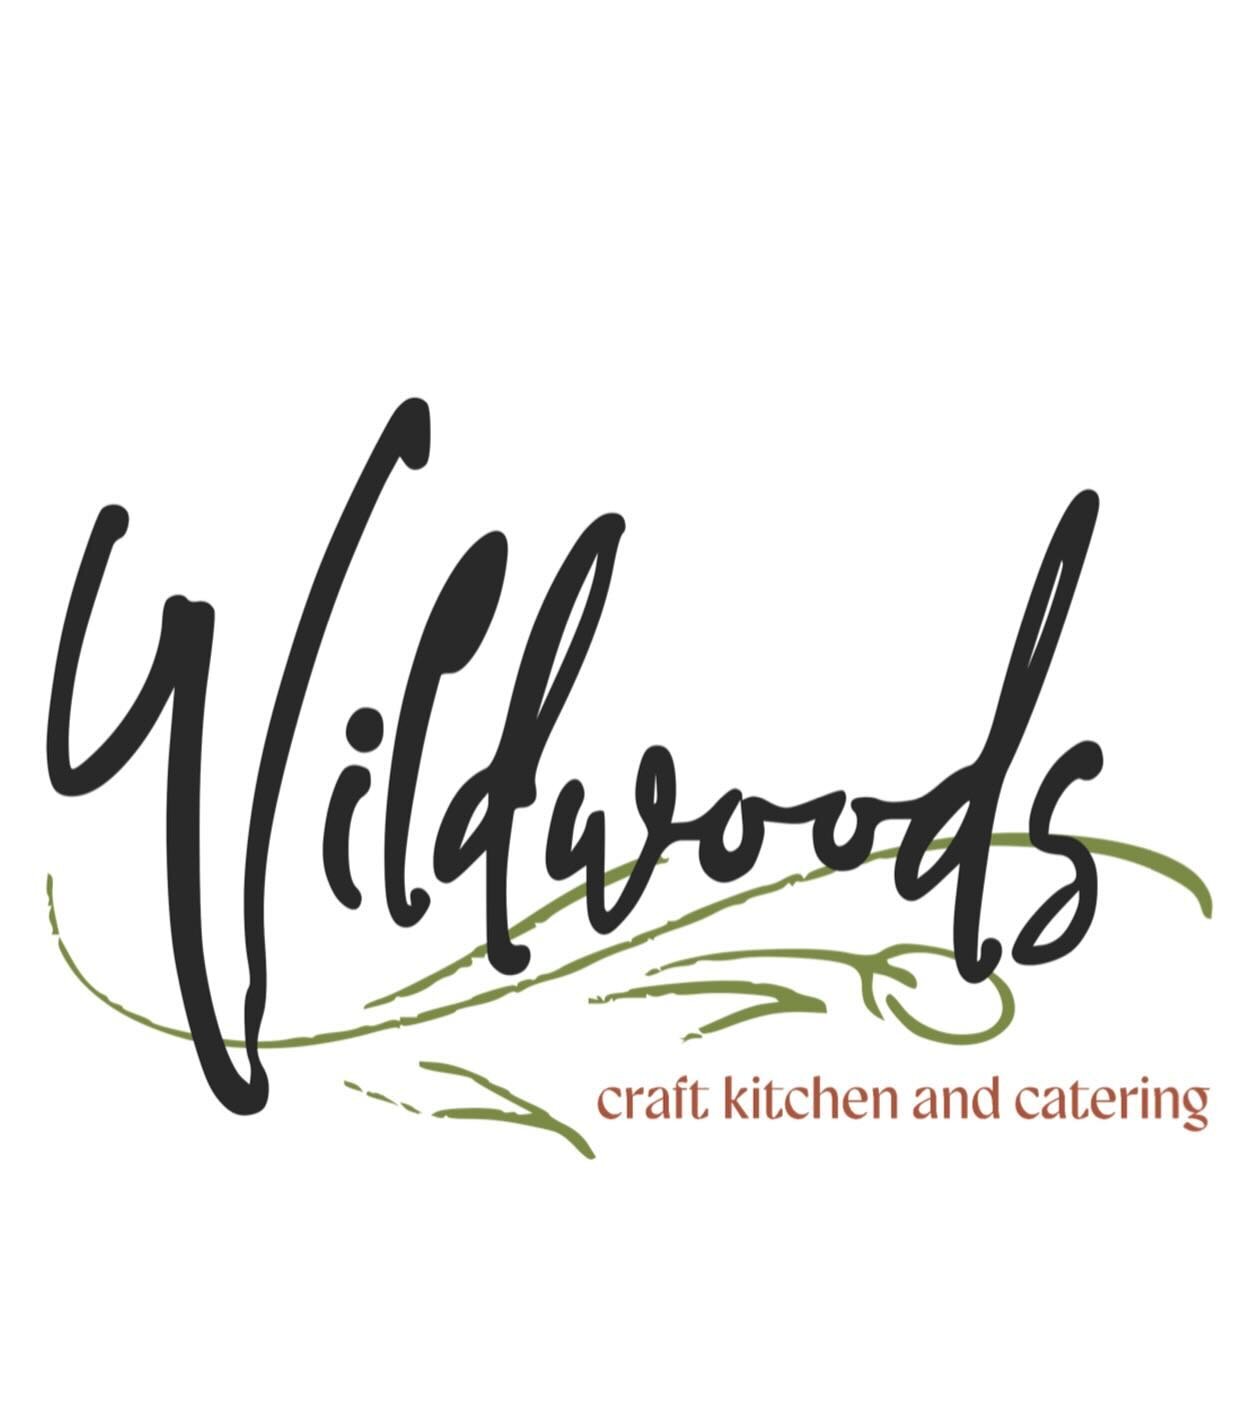 Wildwoods Craft Kitchen and Catering, led by Executive Chef Kevin Hermann, is the elevated brand of @bistrotogo_ Catering. Our menus are curated and customized with a seasonal focus, creating an individualized, uniquely designed event, be it a gather